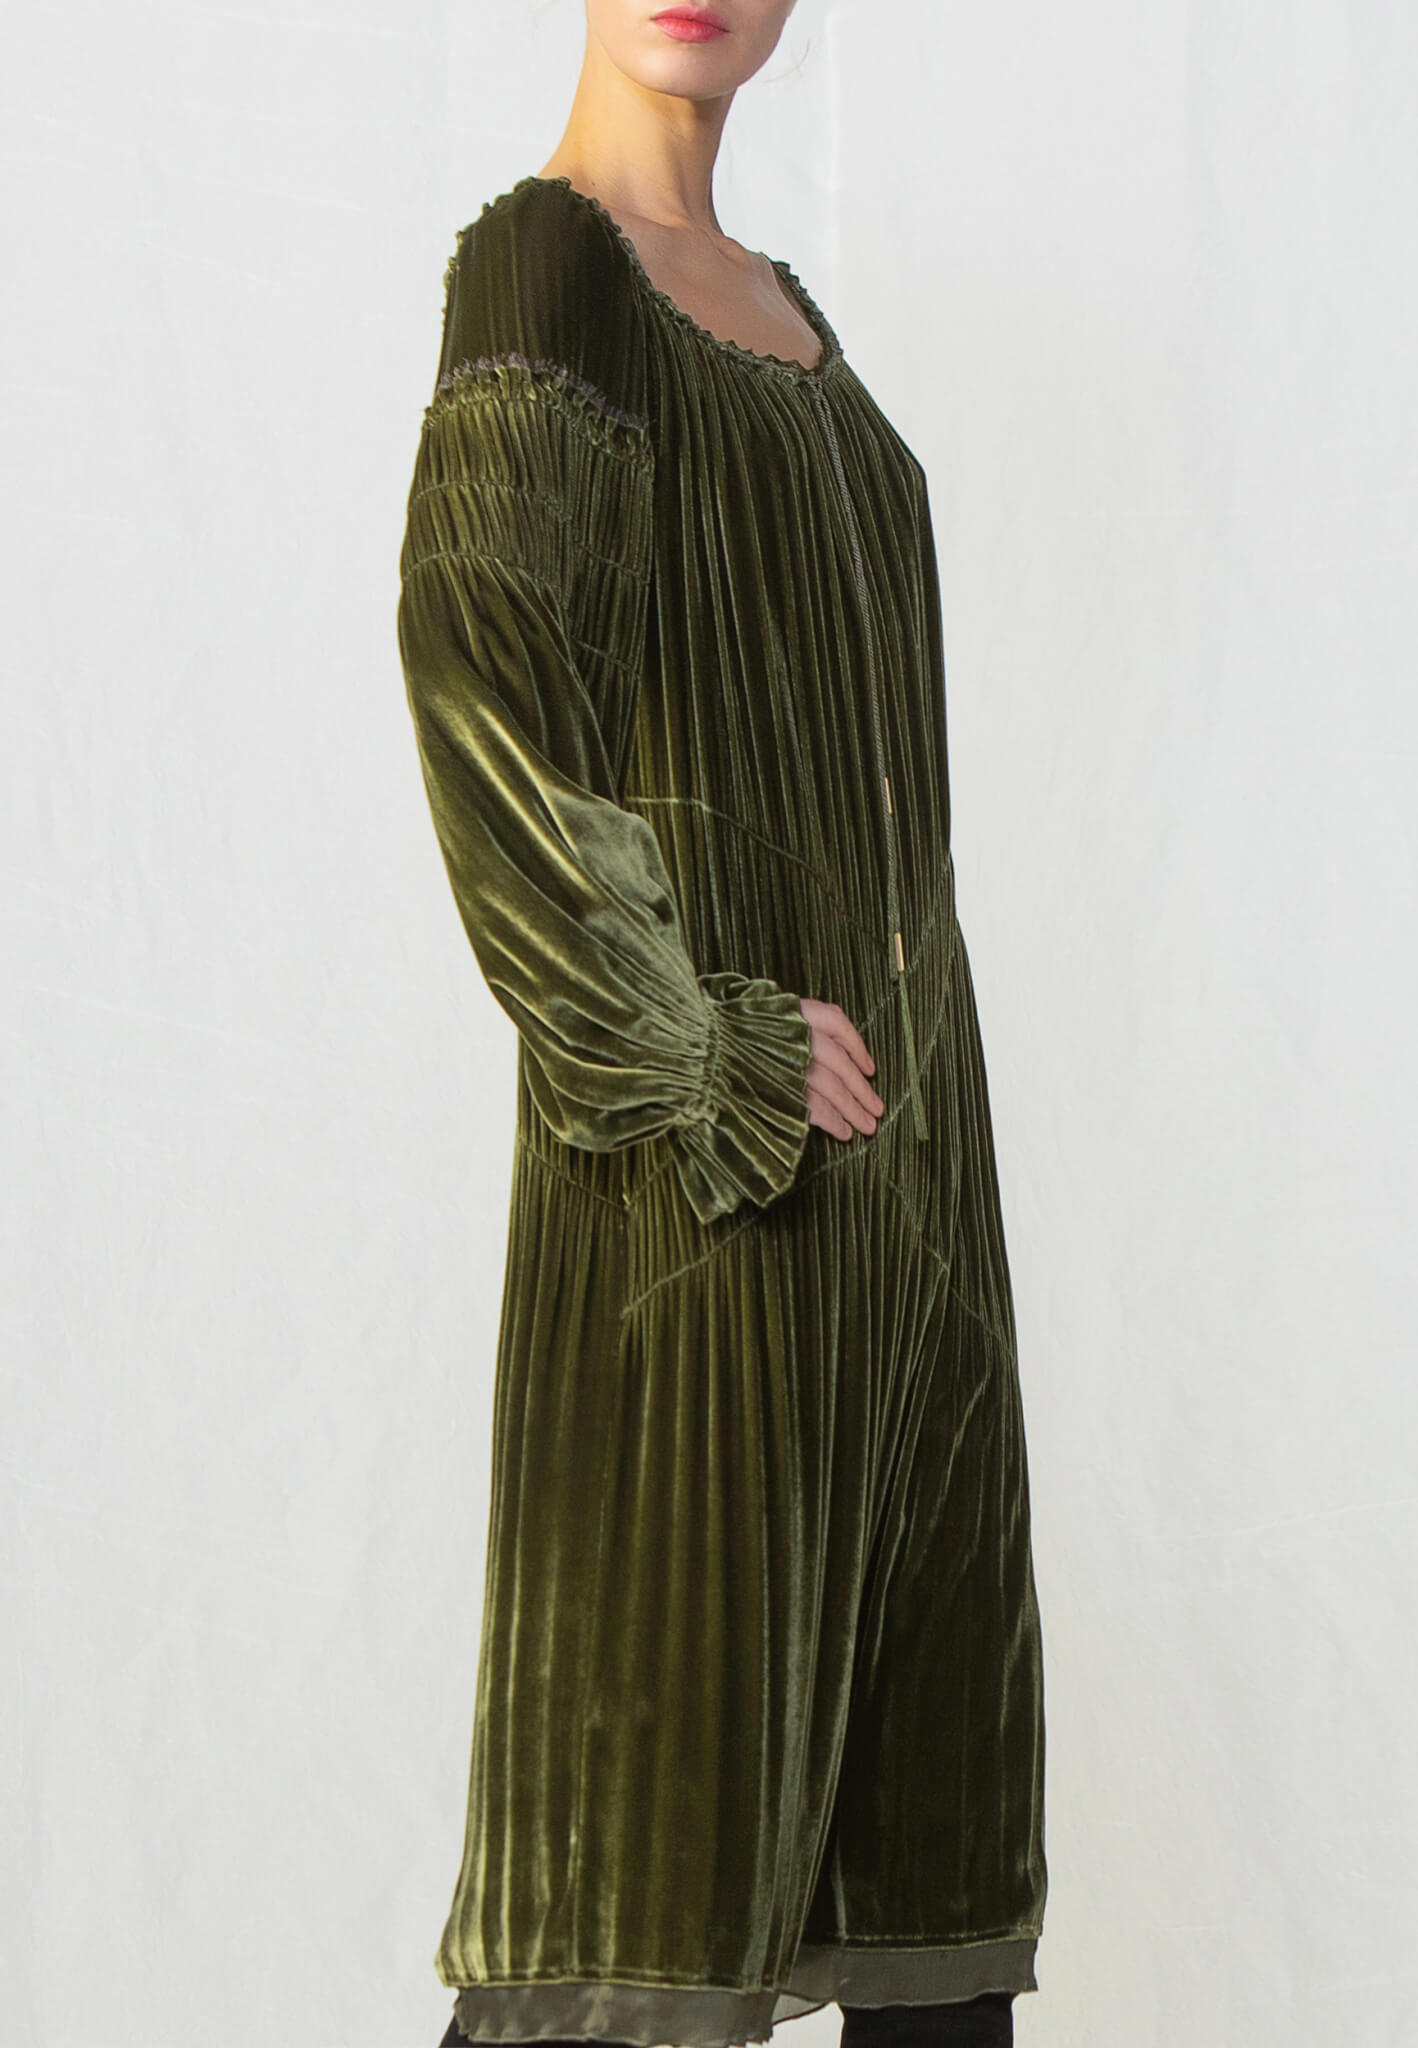 Green velour dress with embroidery